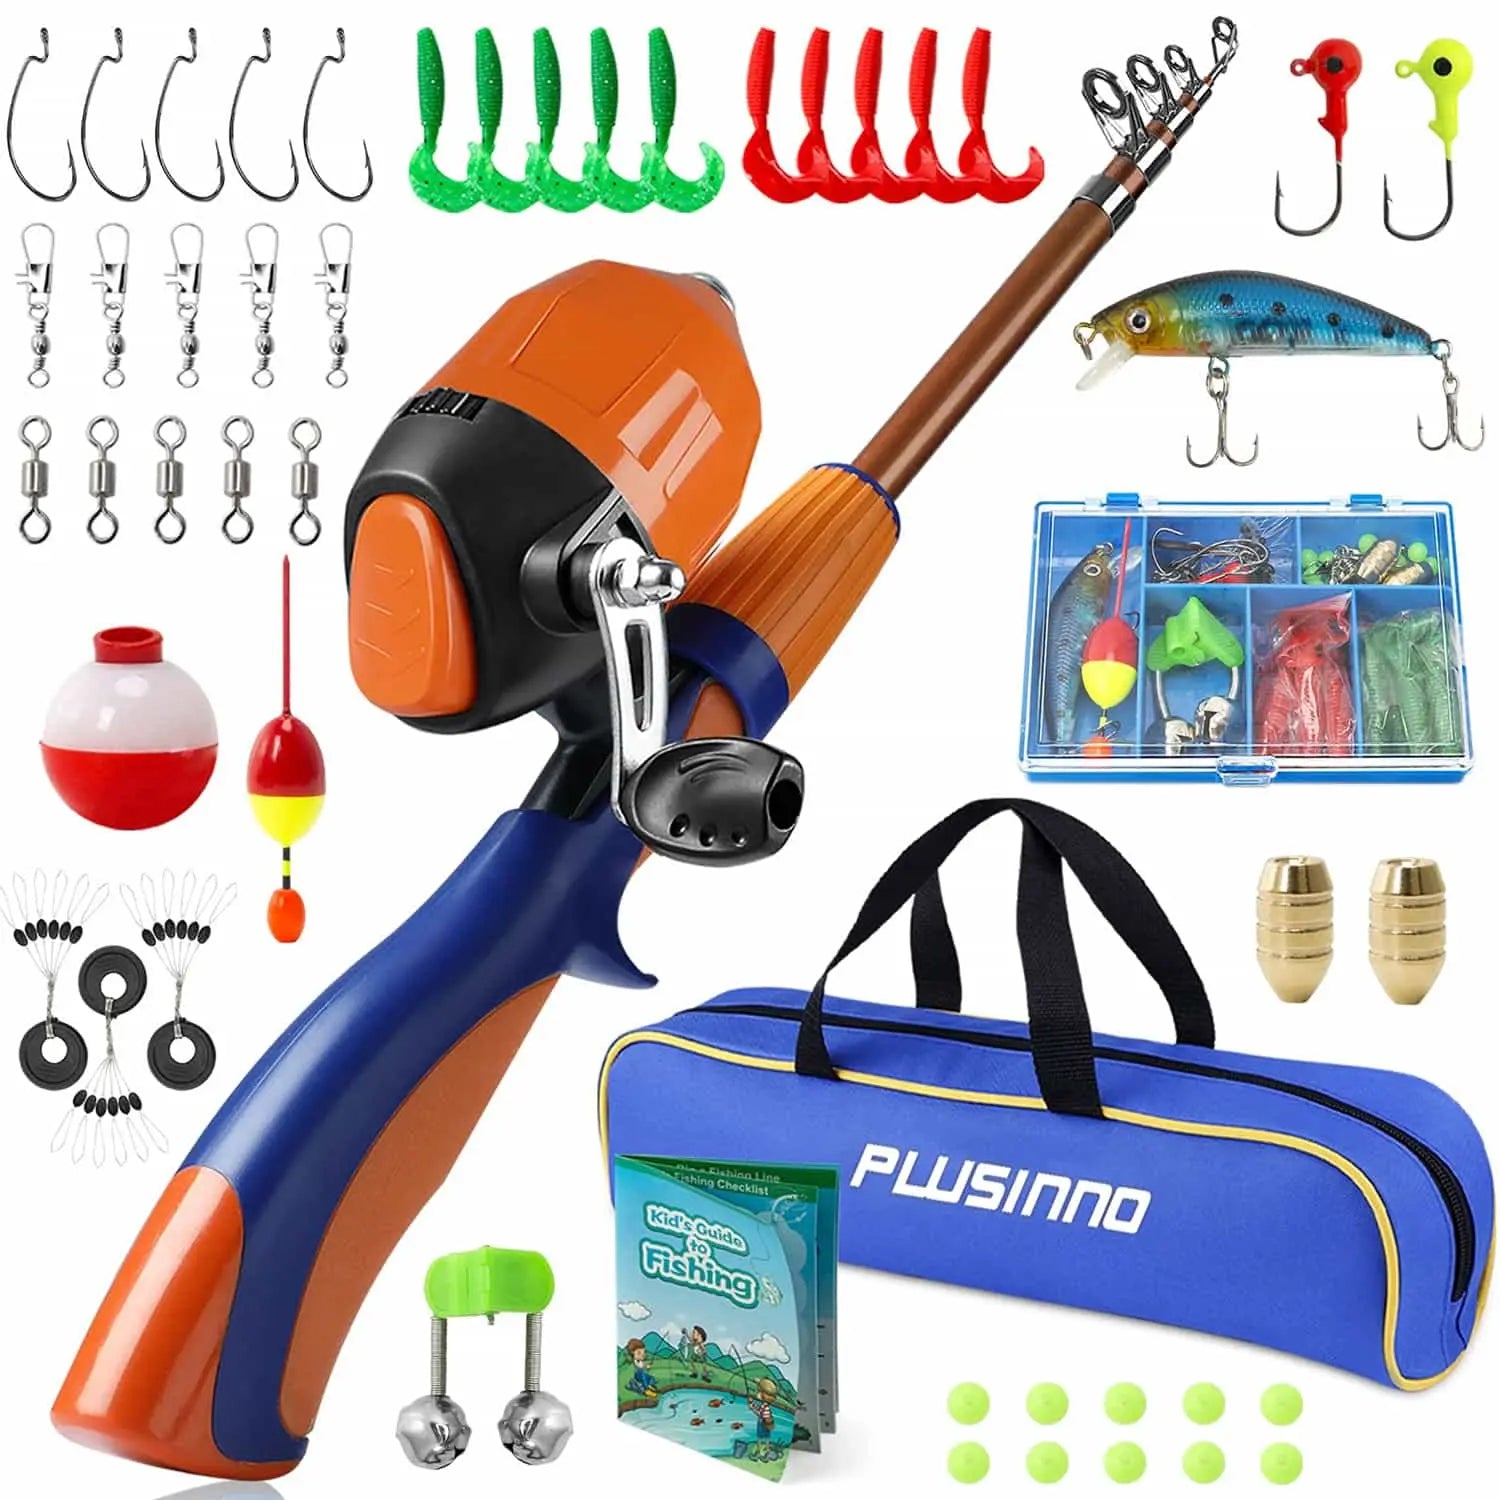 Kids Fishing Full Kit, EVA Handle Children's Fishing Pole With Accessories  For 10 To 12 Years Old For Outdoor Orange,Blue,Pink,Red 